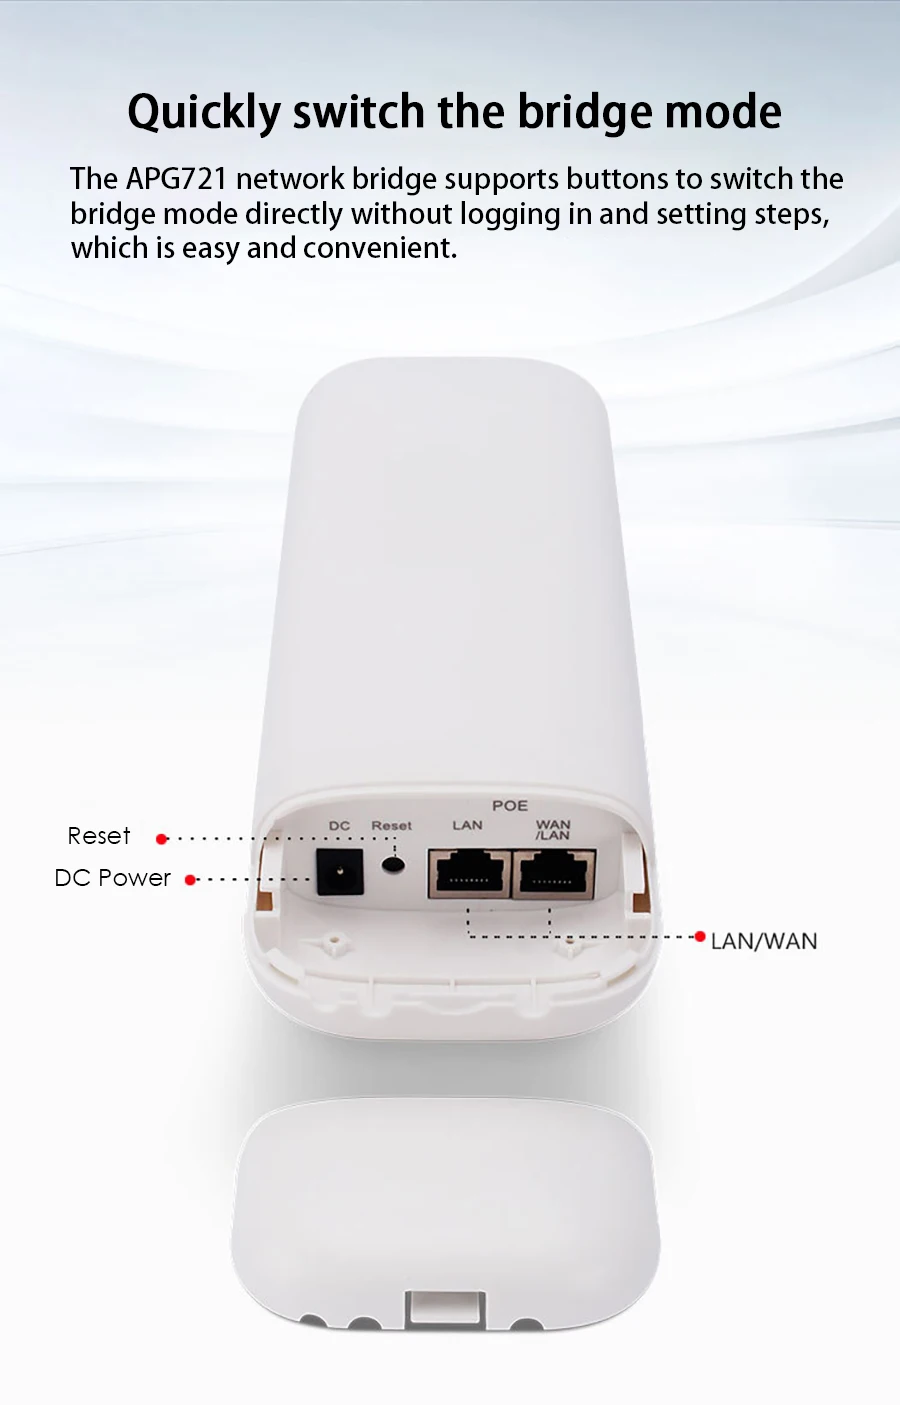 2km Wifi Range Outdoor Wireless Data Transmission Bridge Access Point CPE 5ghz with POE Power Adapter 300mbps Network Router best wifi amplifier